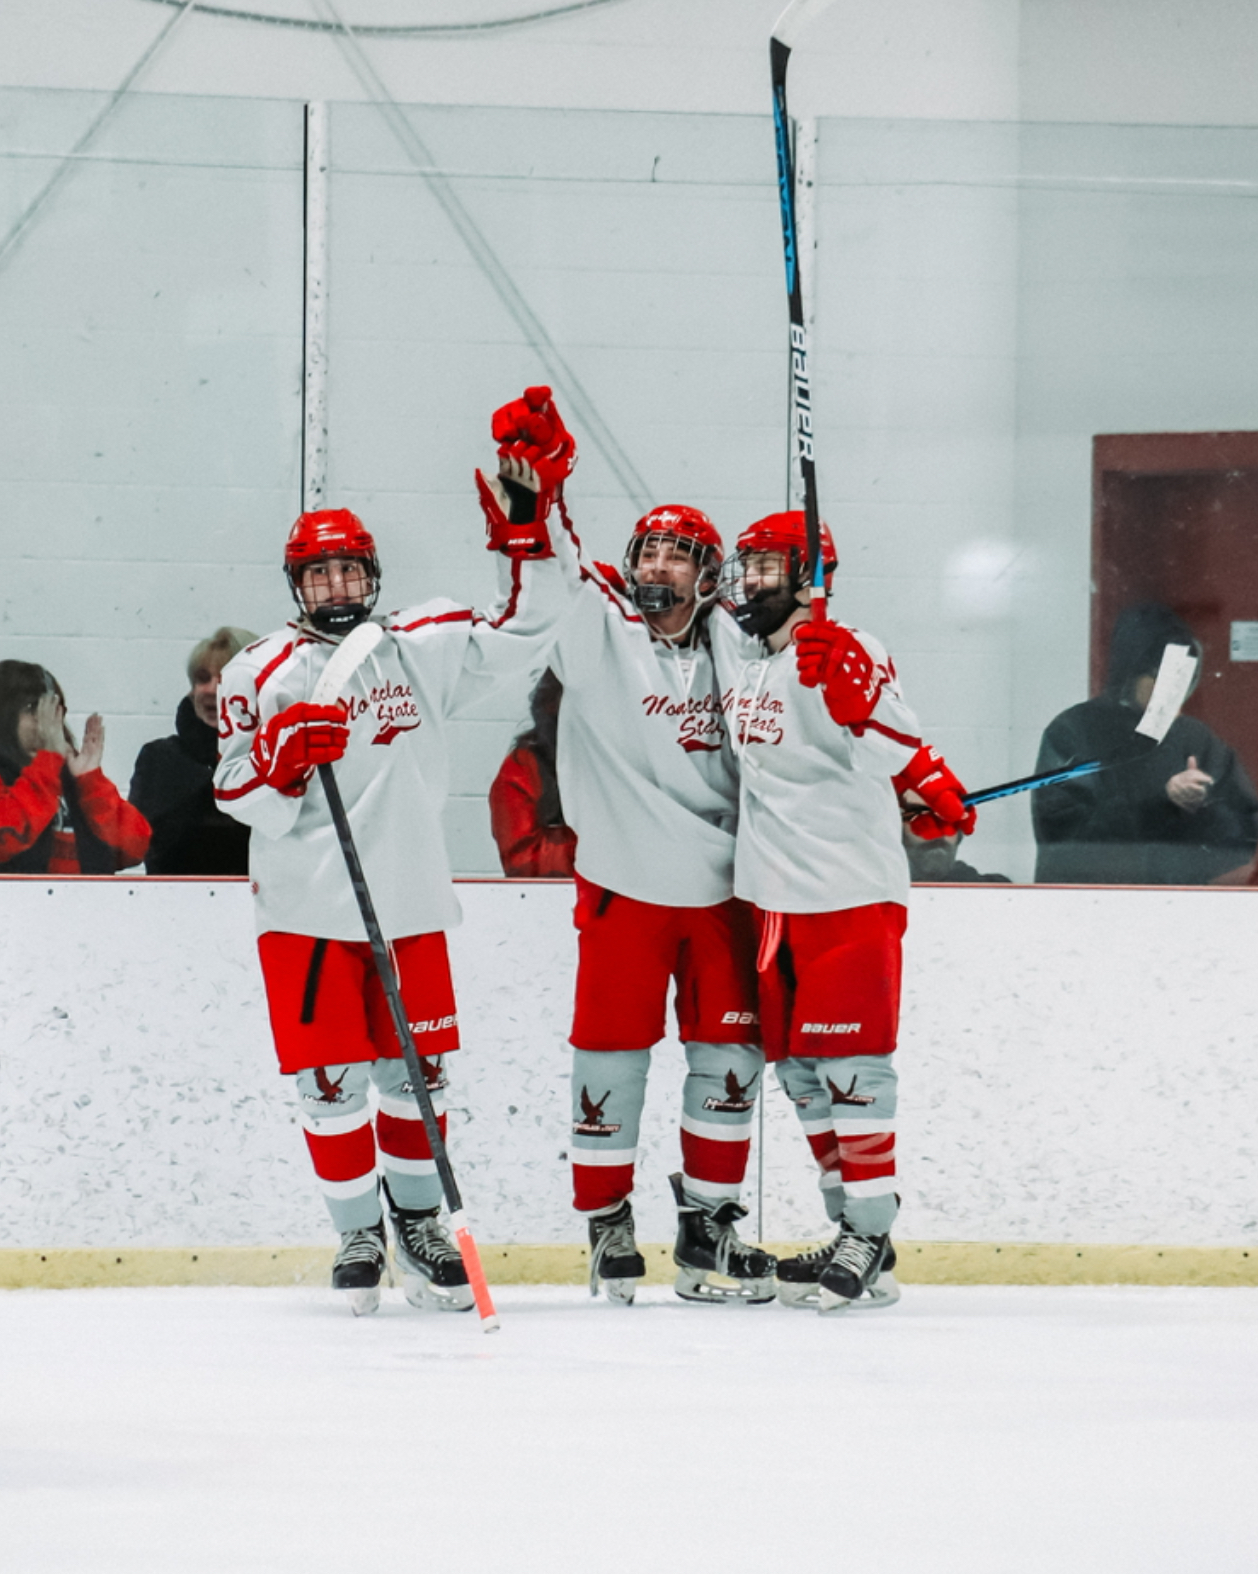 Celebration after breaking the 4-4 tie between the Redhawks and Rider